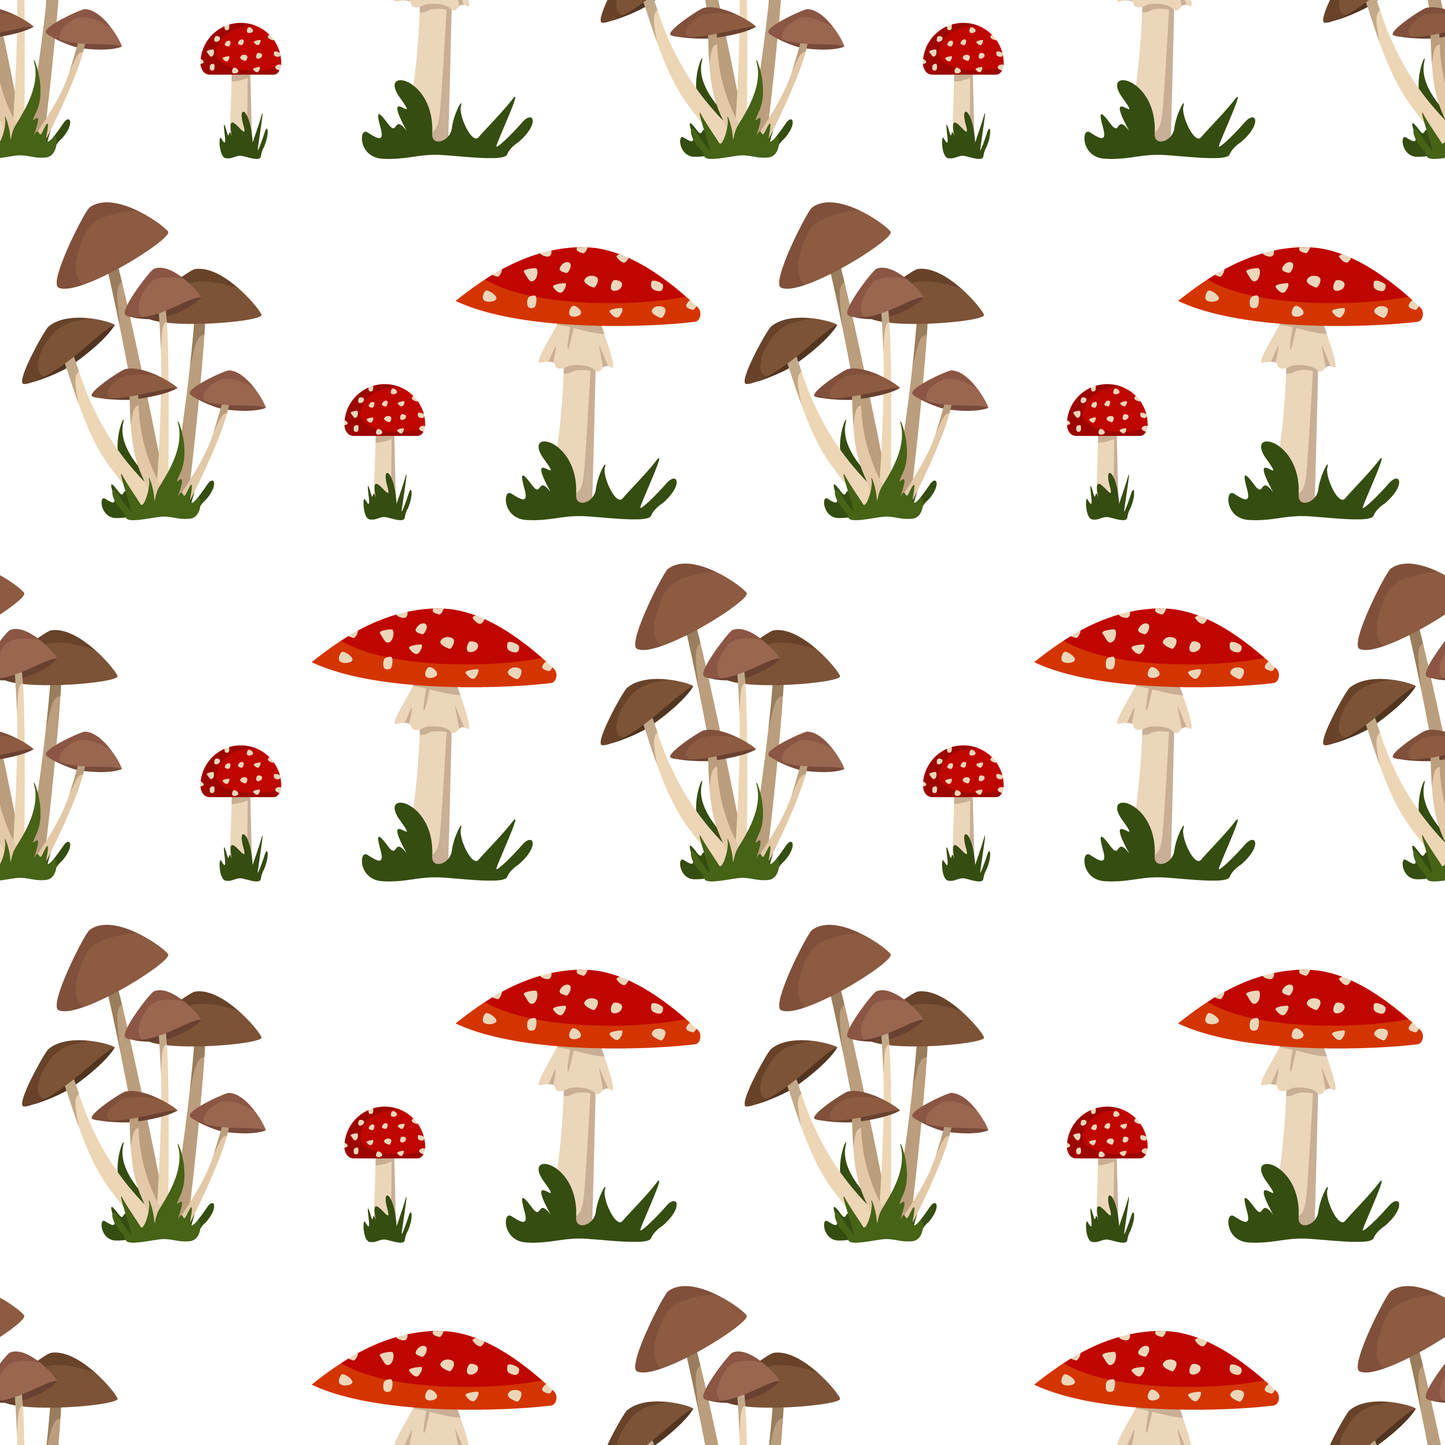 Field of Mushrooms (Faux Leather - 8" x 13" Printed Sheet)